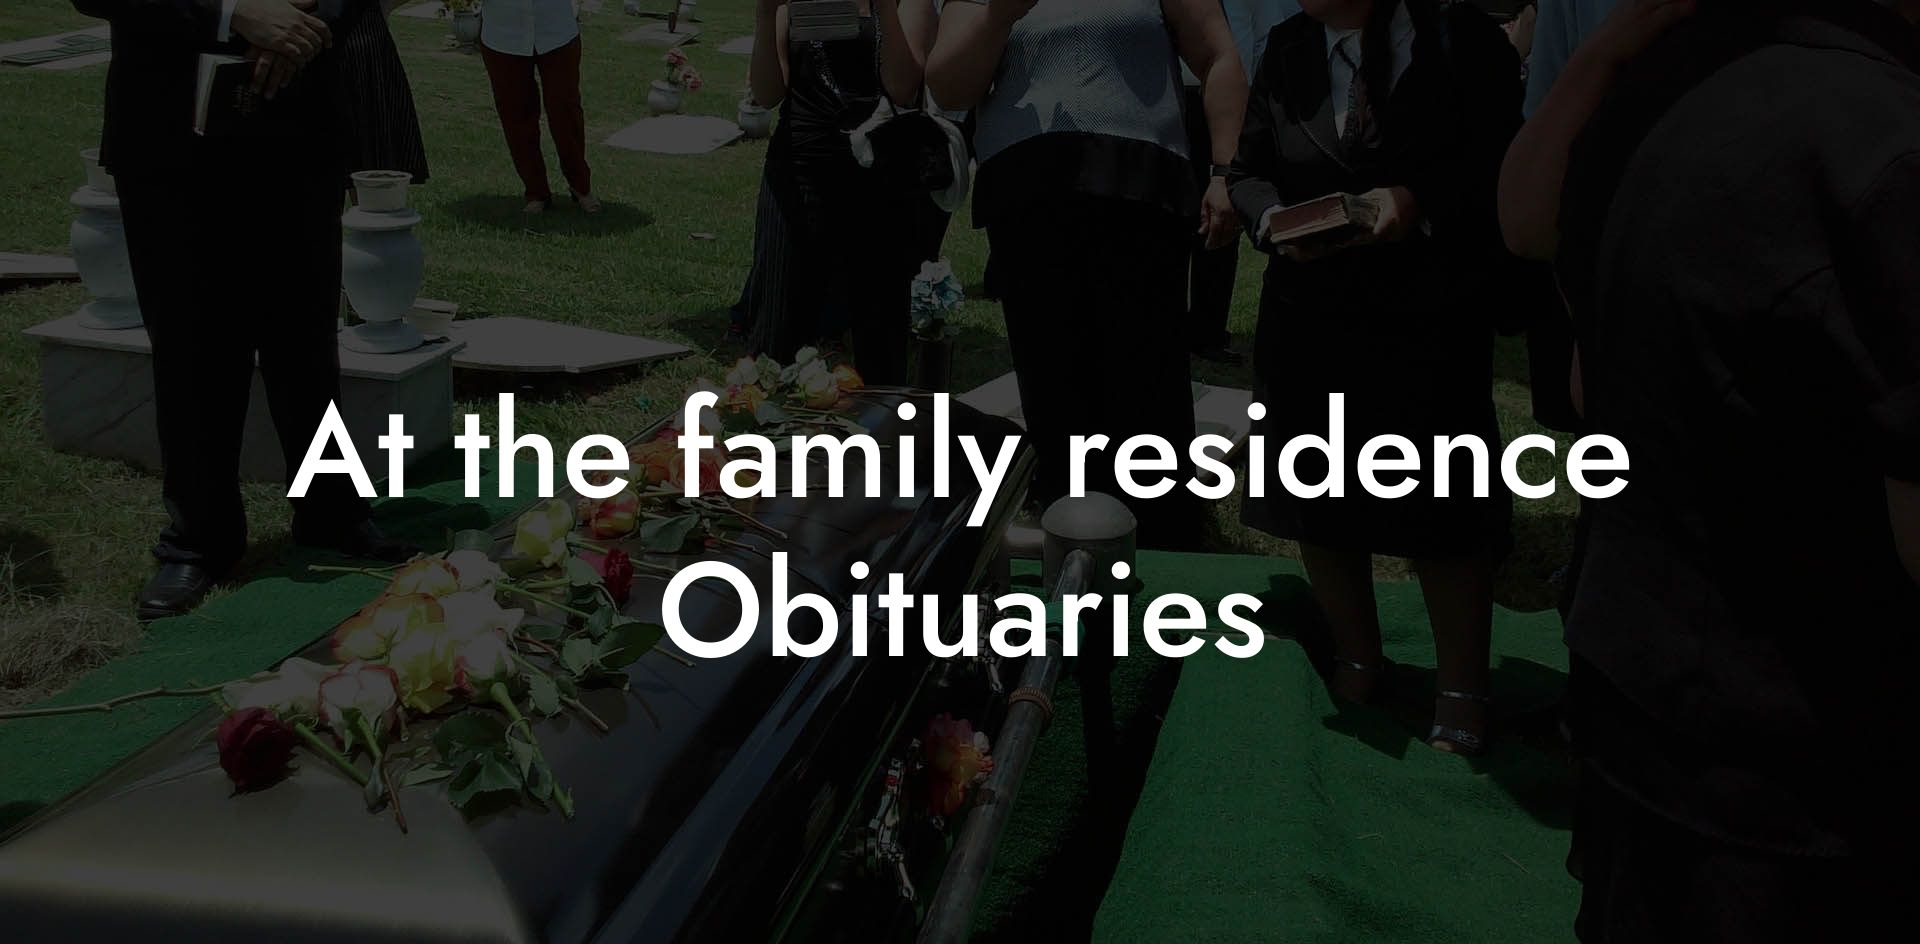 At the family residence Obituaries